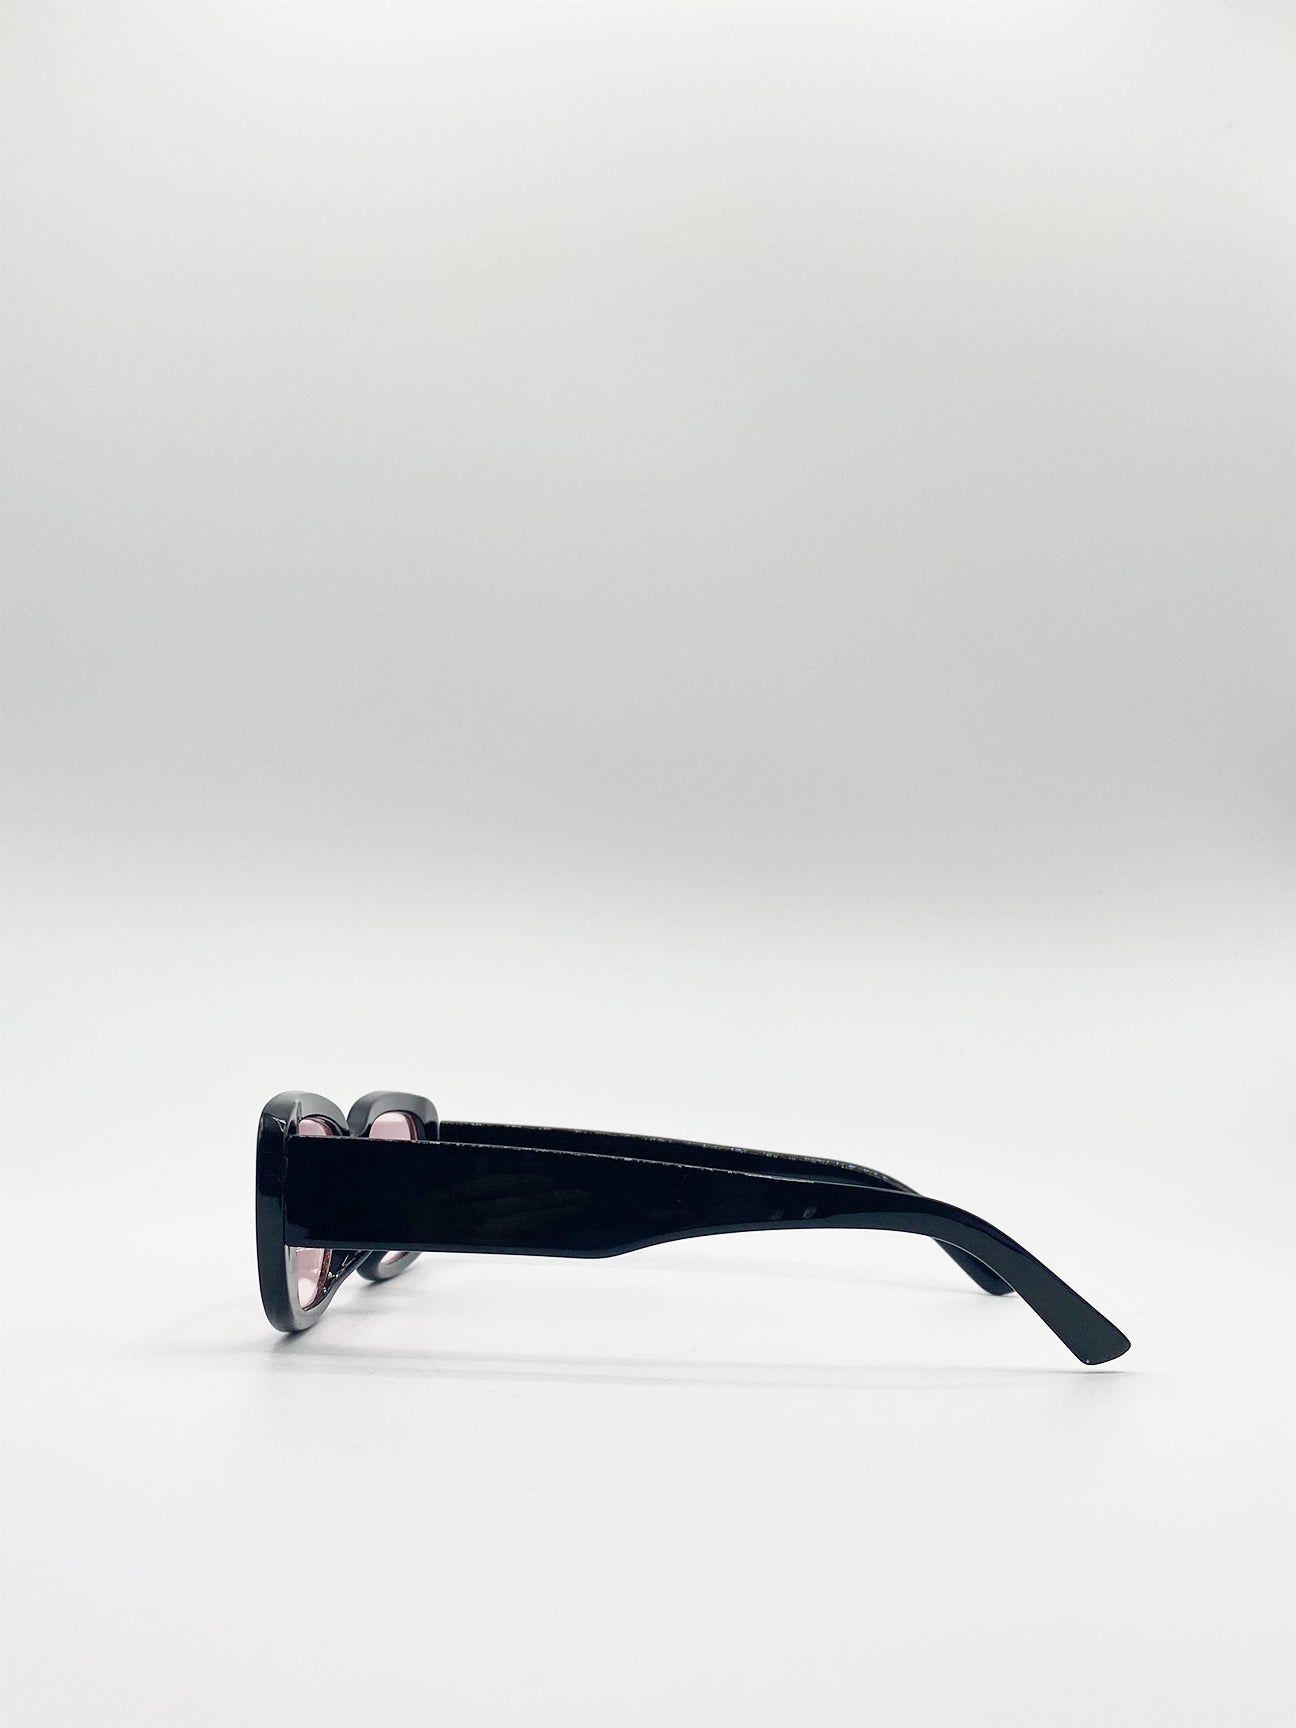 Retro Rectangle Sunglasses In Black With Pink Lenses